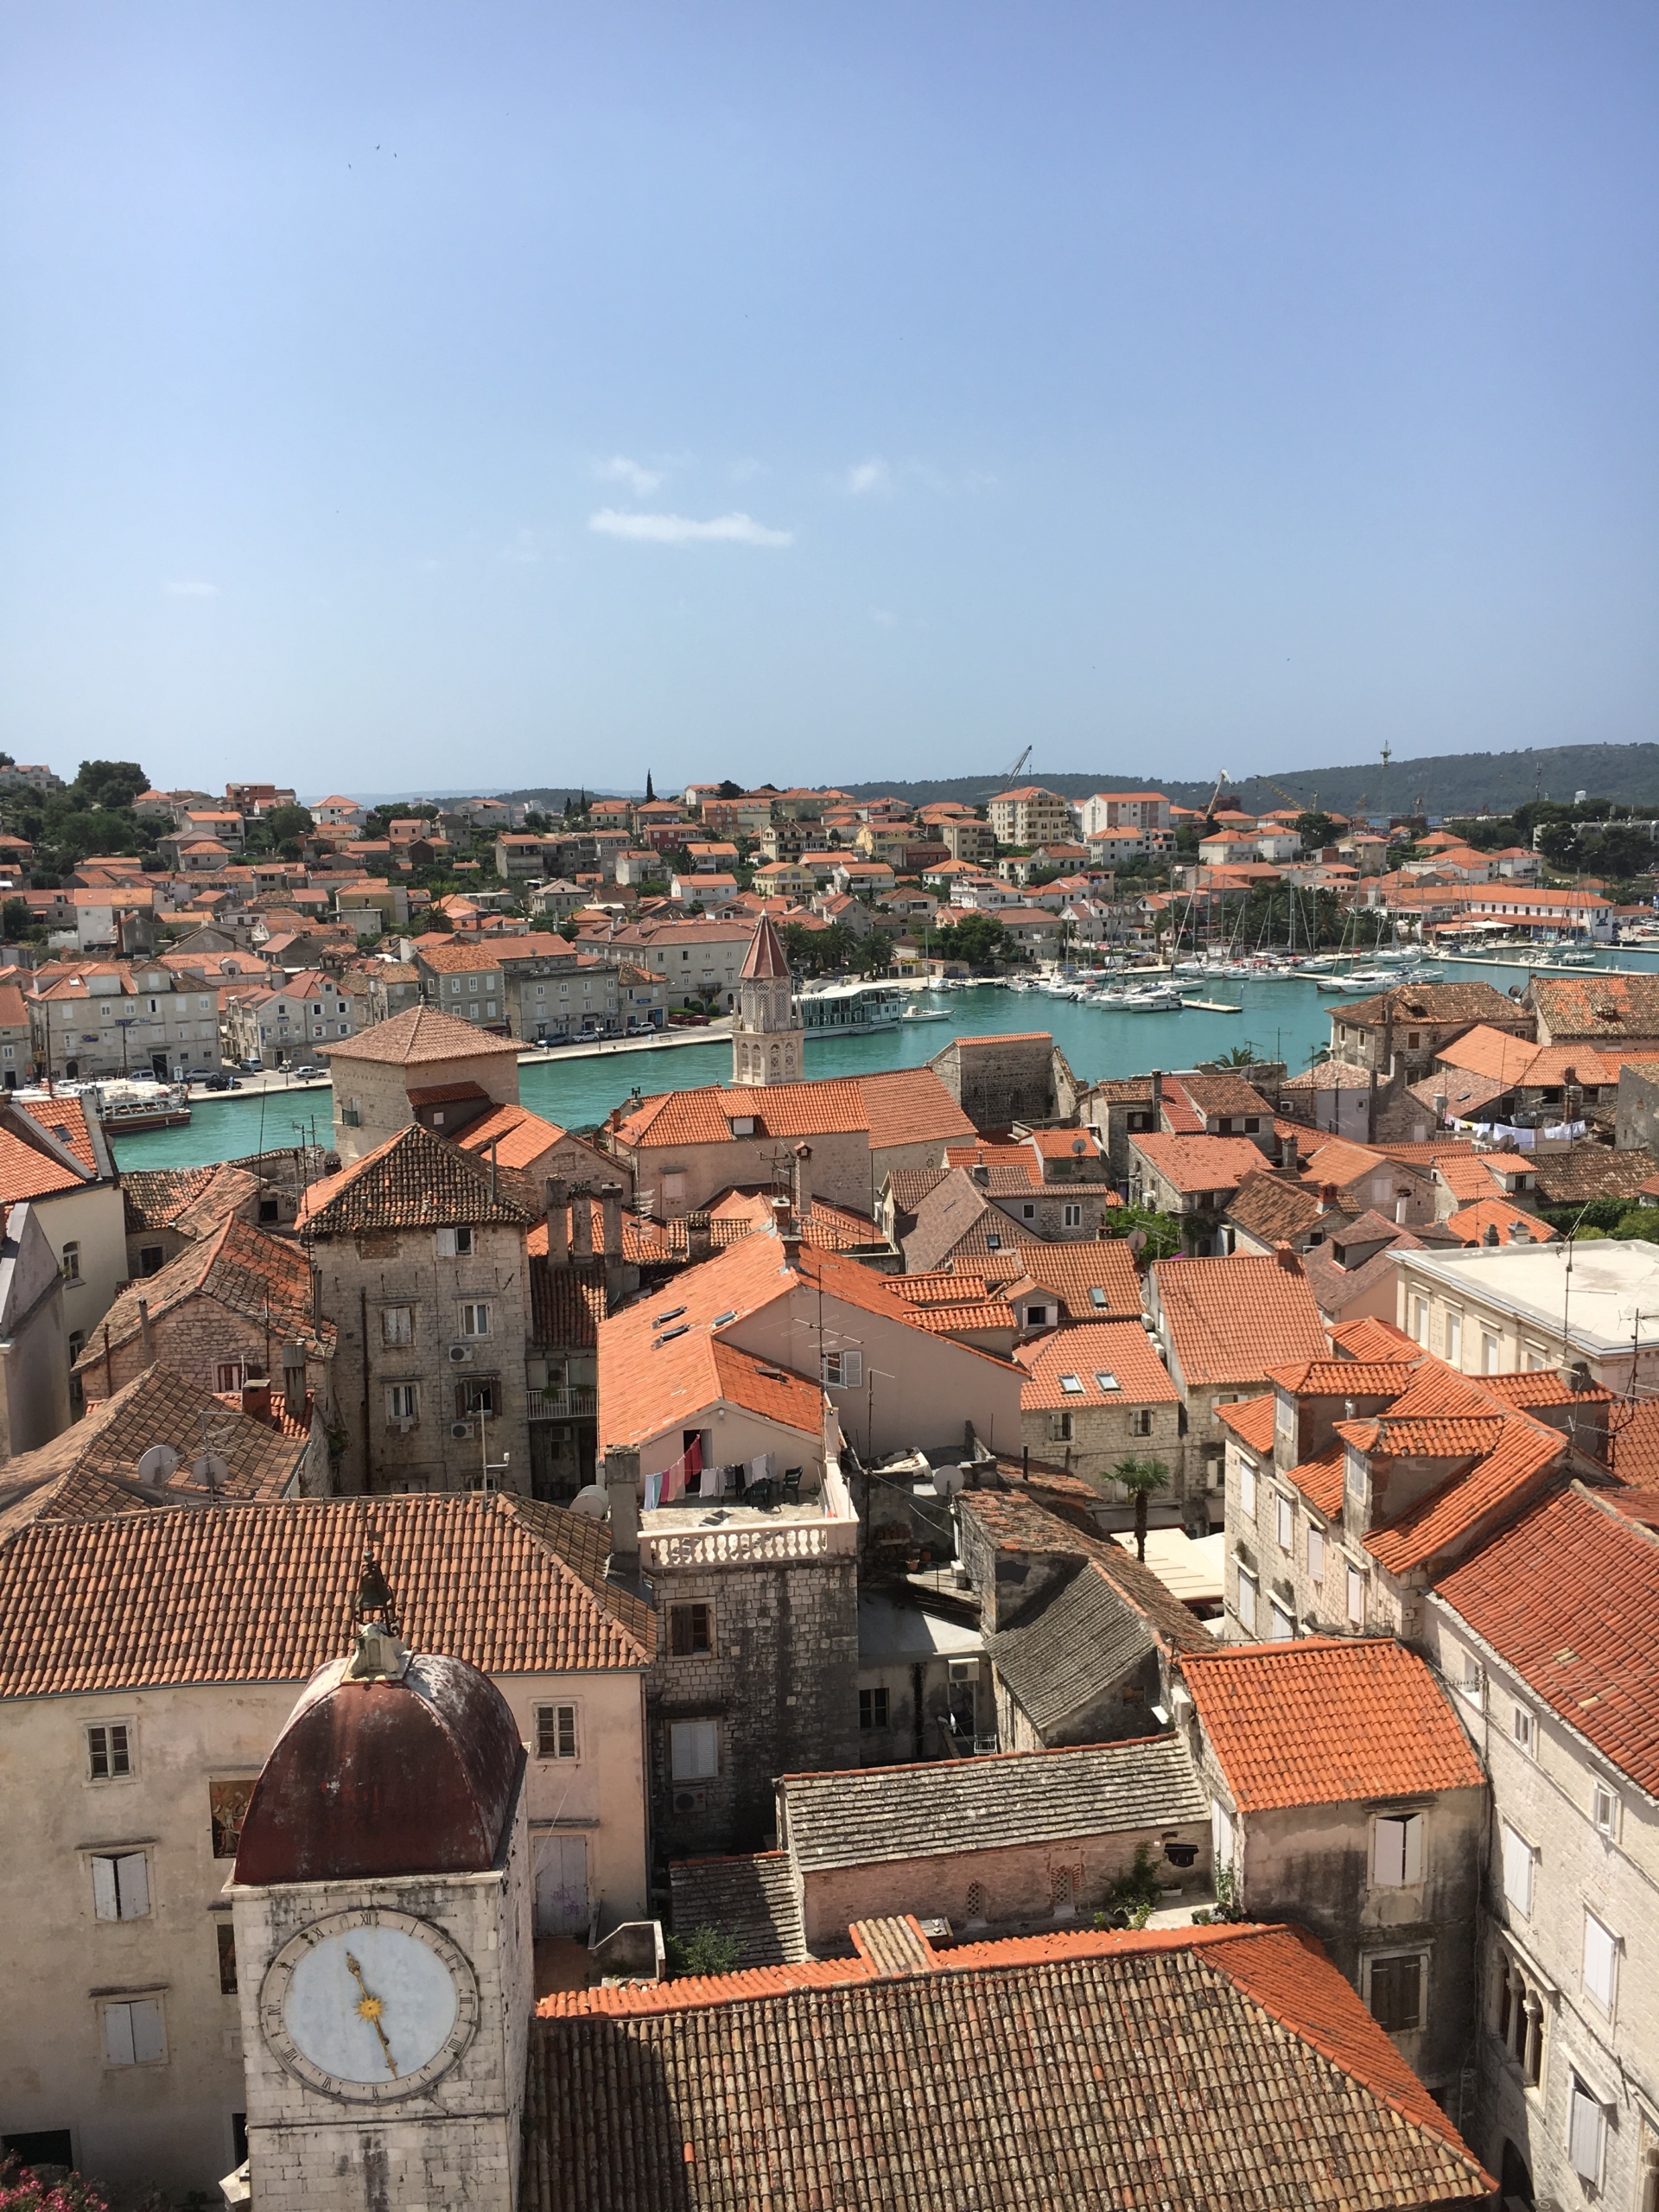 Trogir, steeped in history